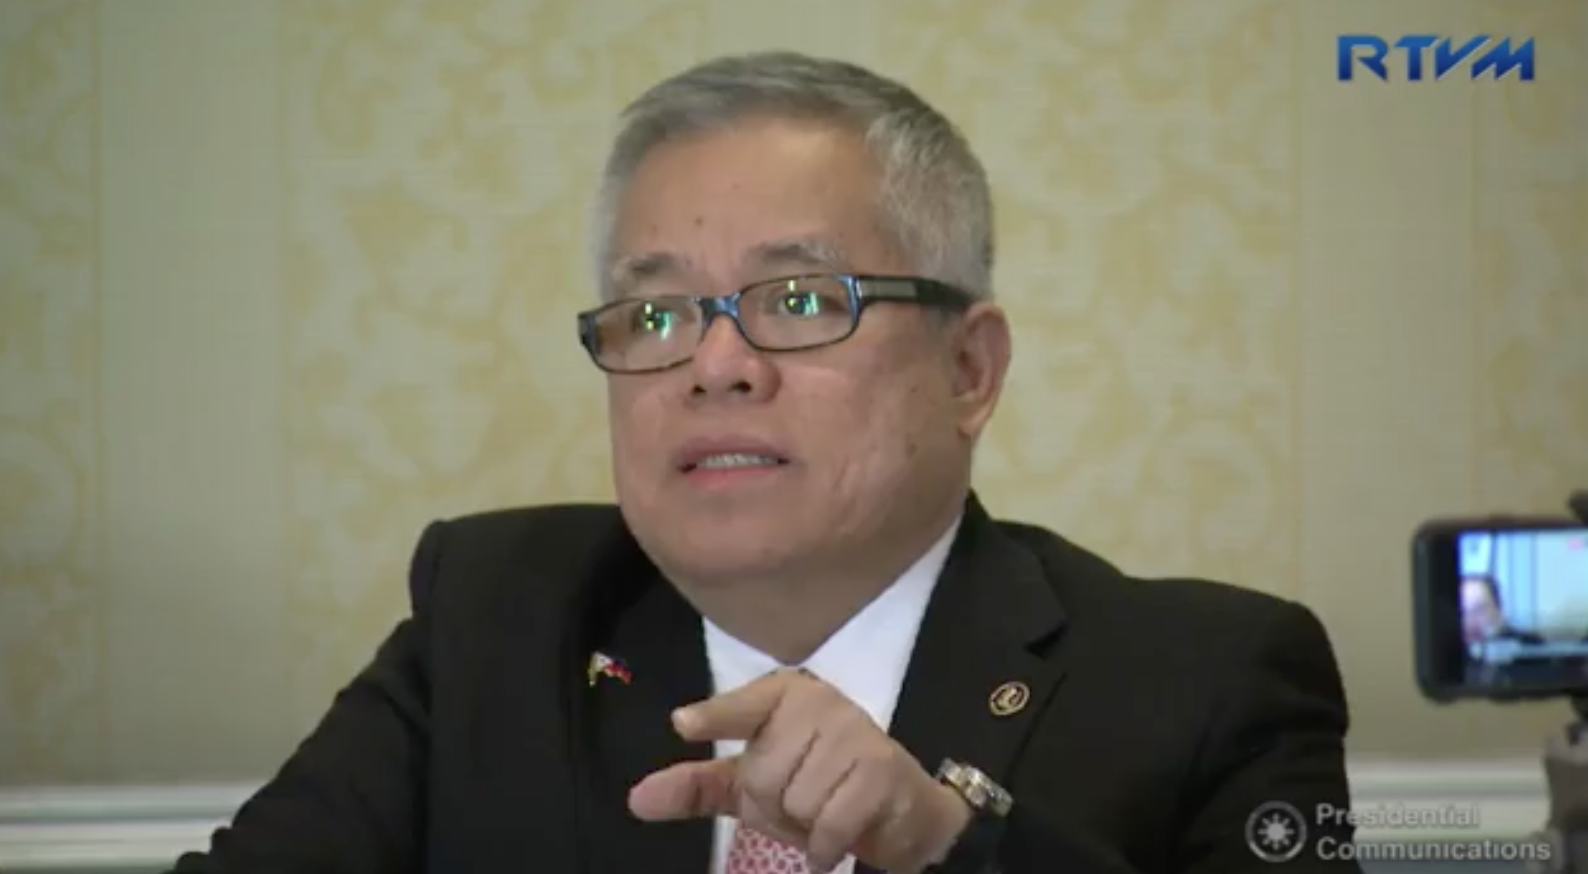 DTI chief: No need to raise sinking of PH boat in WPS at Asean summit